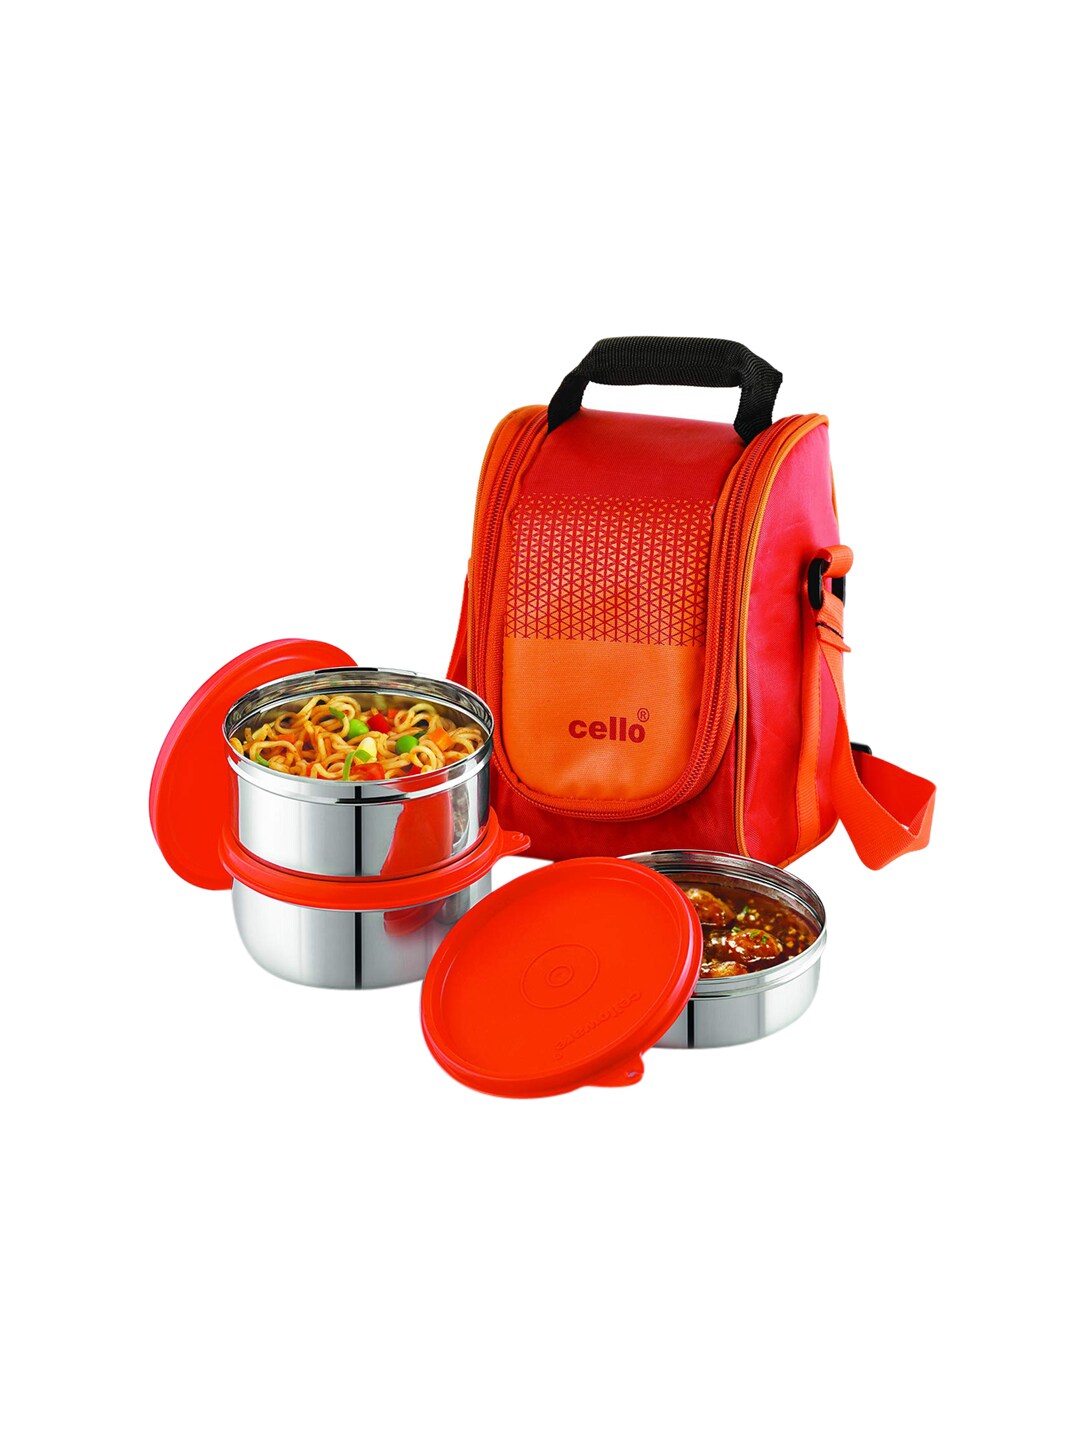 Cello Unisex Orange & Silver-Toned Solid Stainless Steel Lunch Box With Bag Price in India